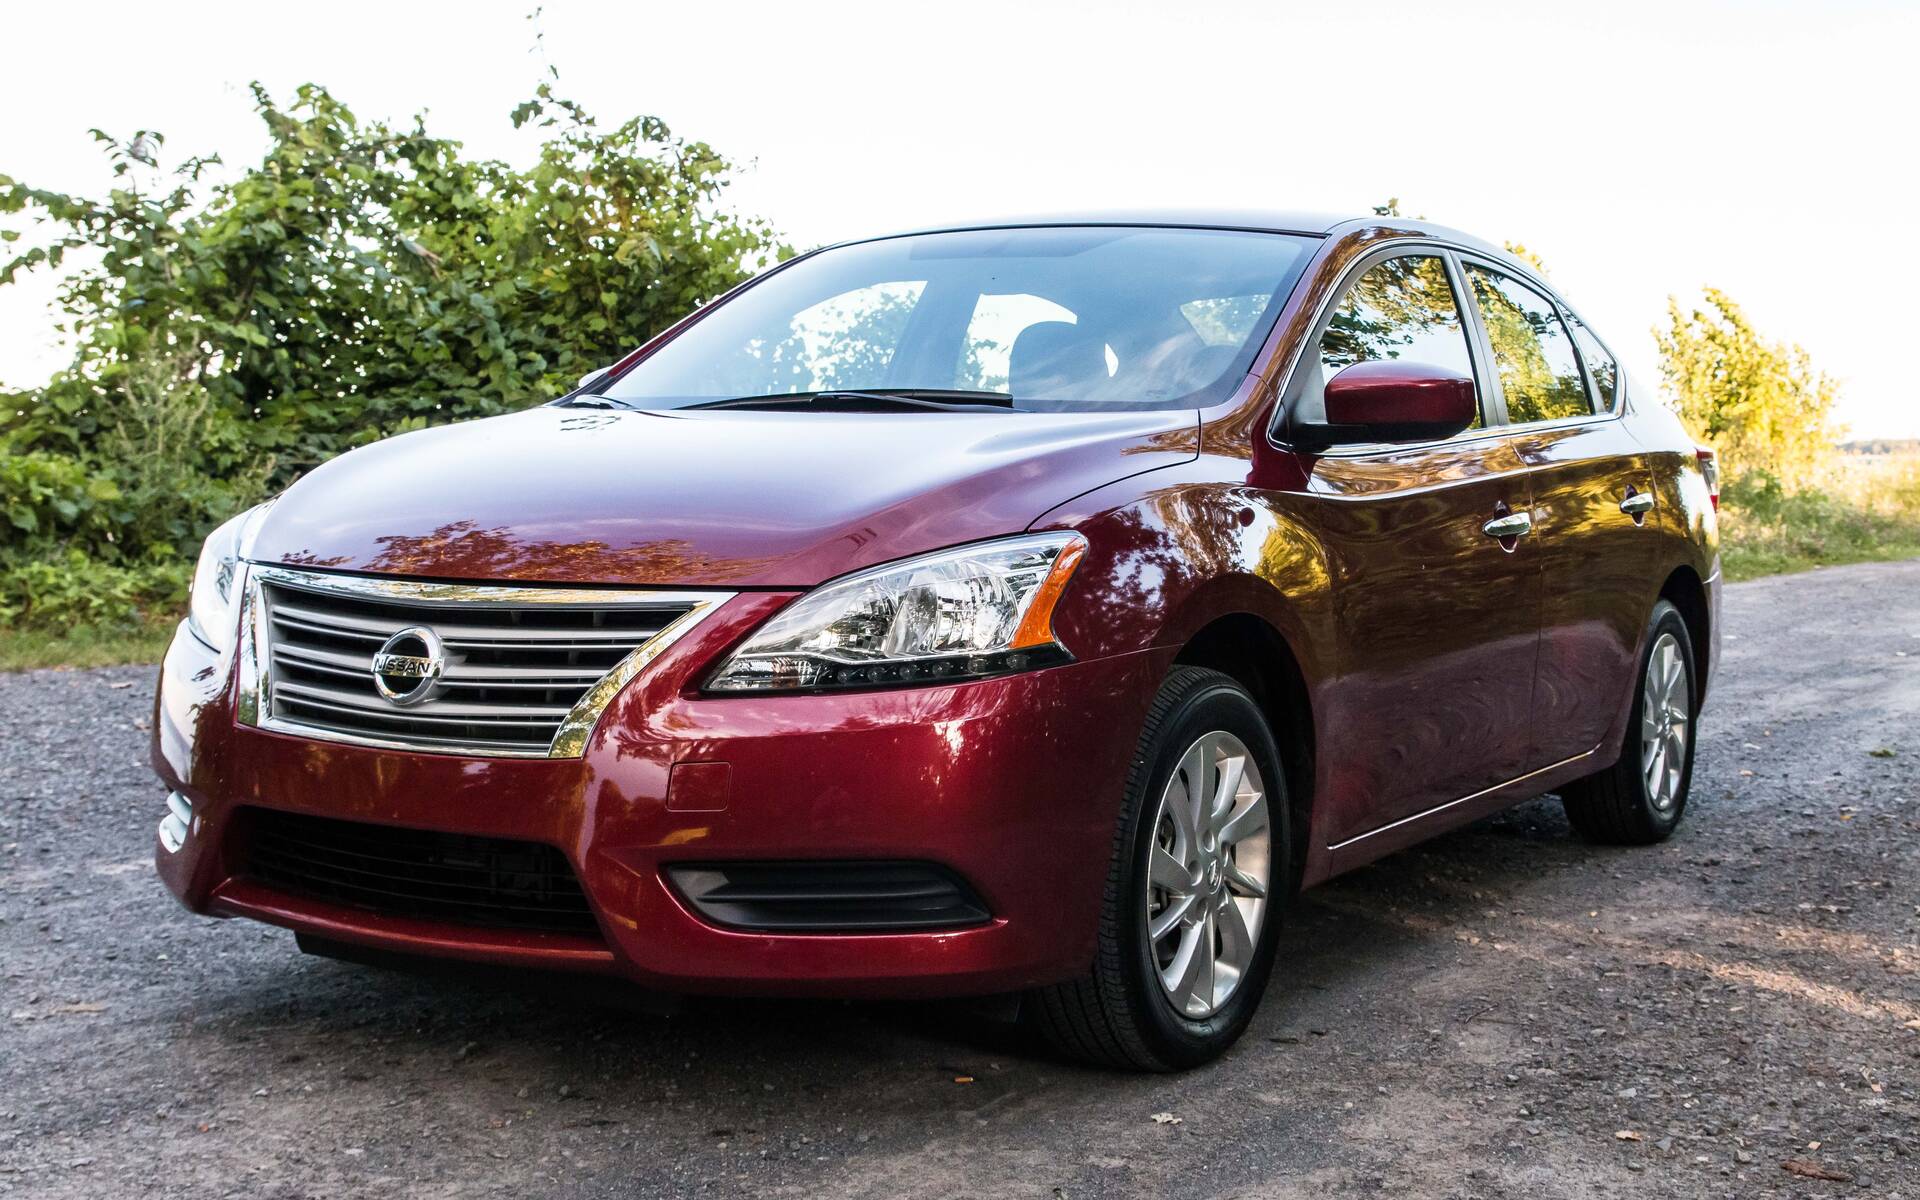 2013-2019 Nissan Sentra: What You Should Know Before Buying - The Car Guide